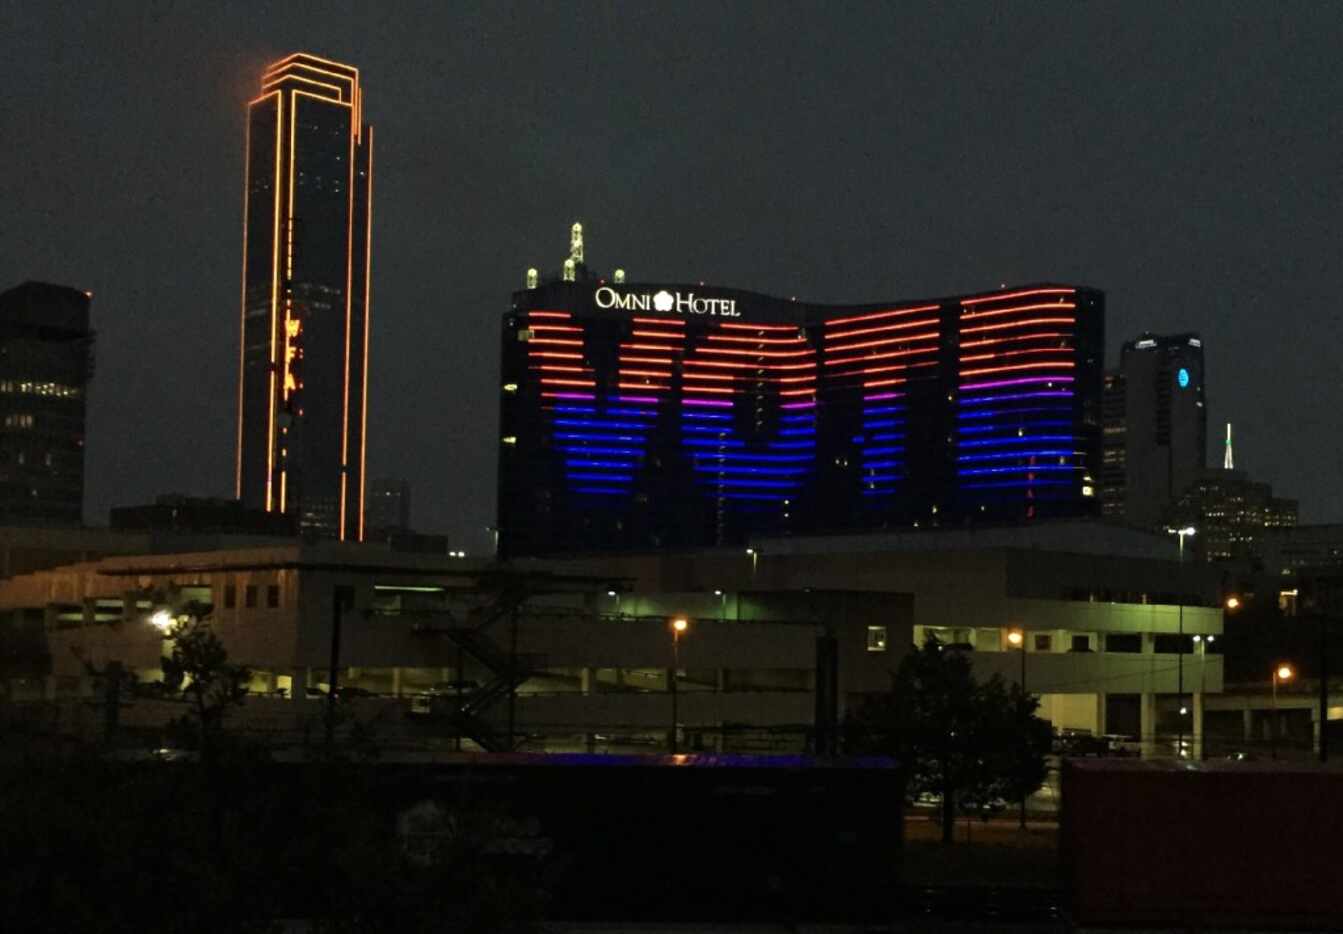 The Omni Dallas Hotel displayed "VOTE" on its hotel early Tuesday morning in downtown...